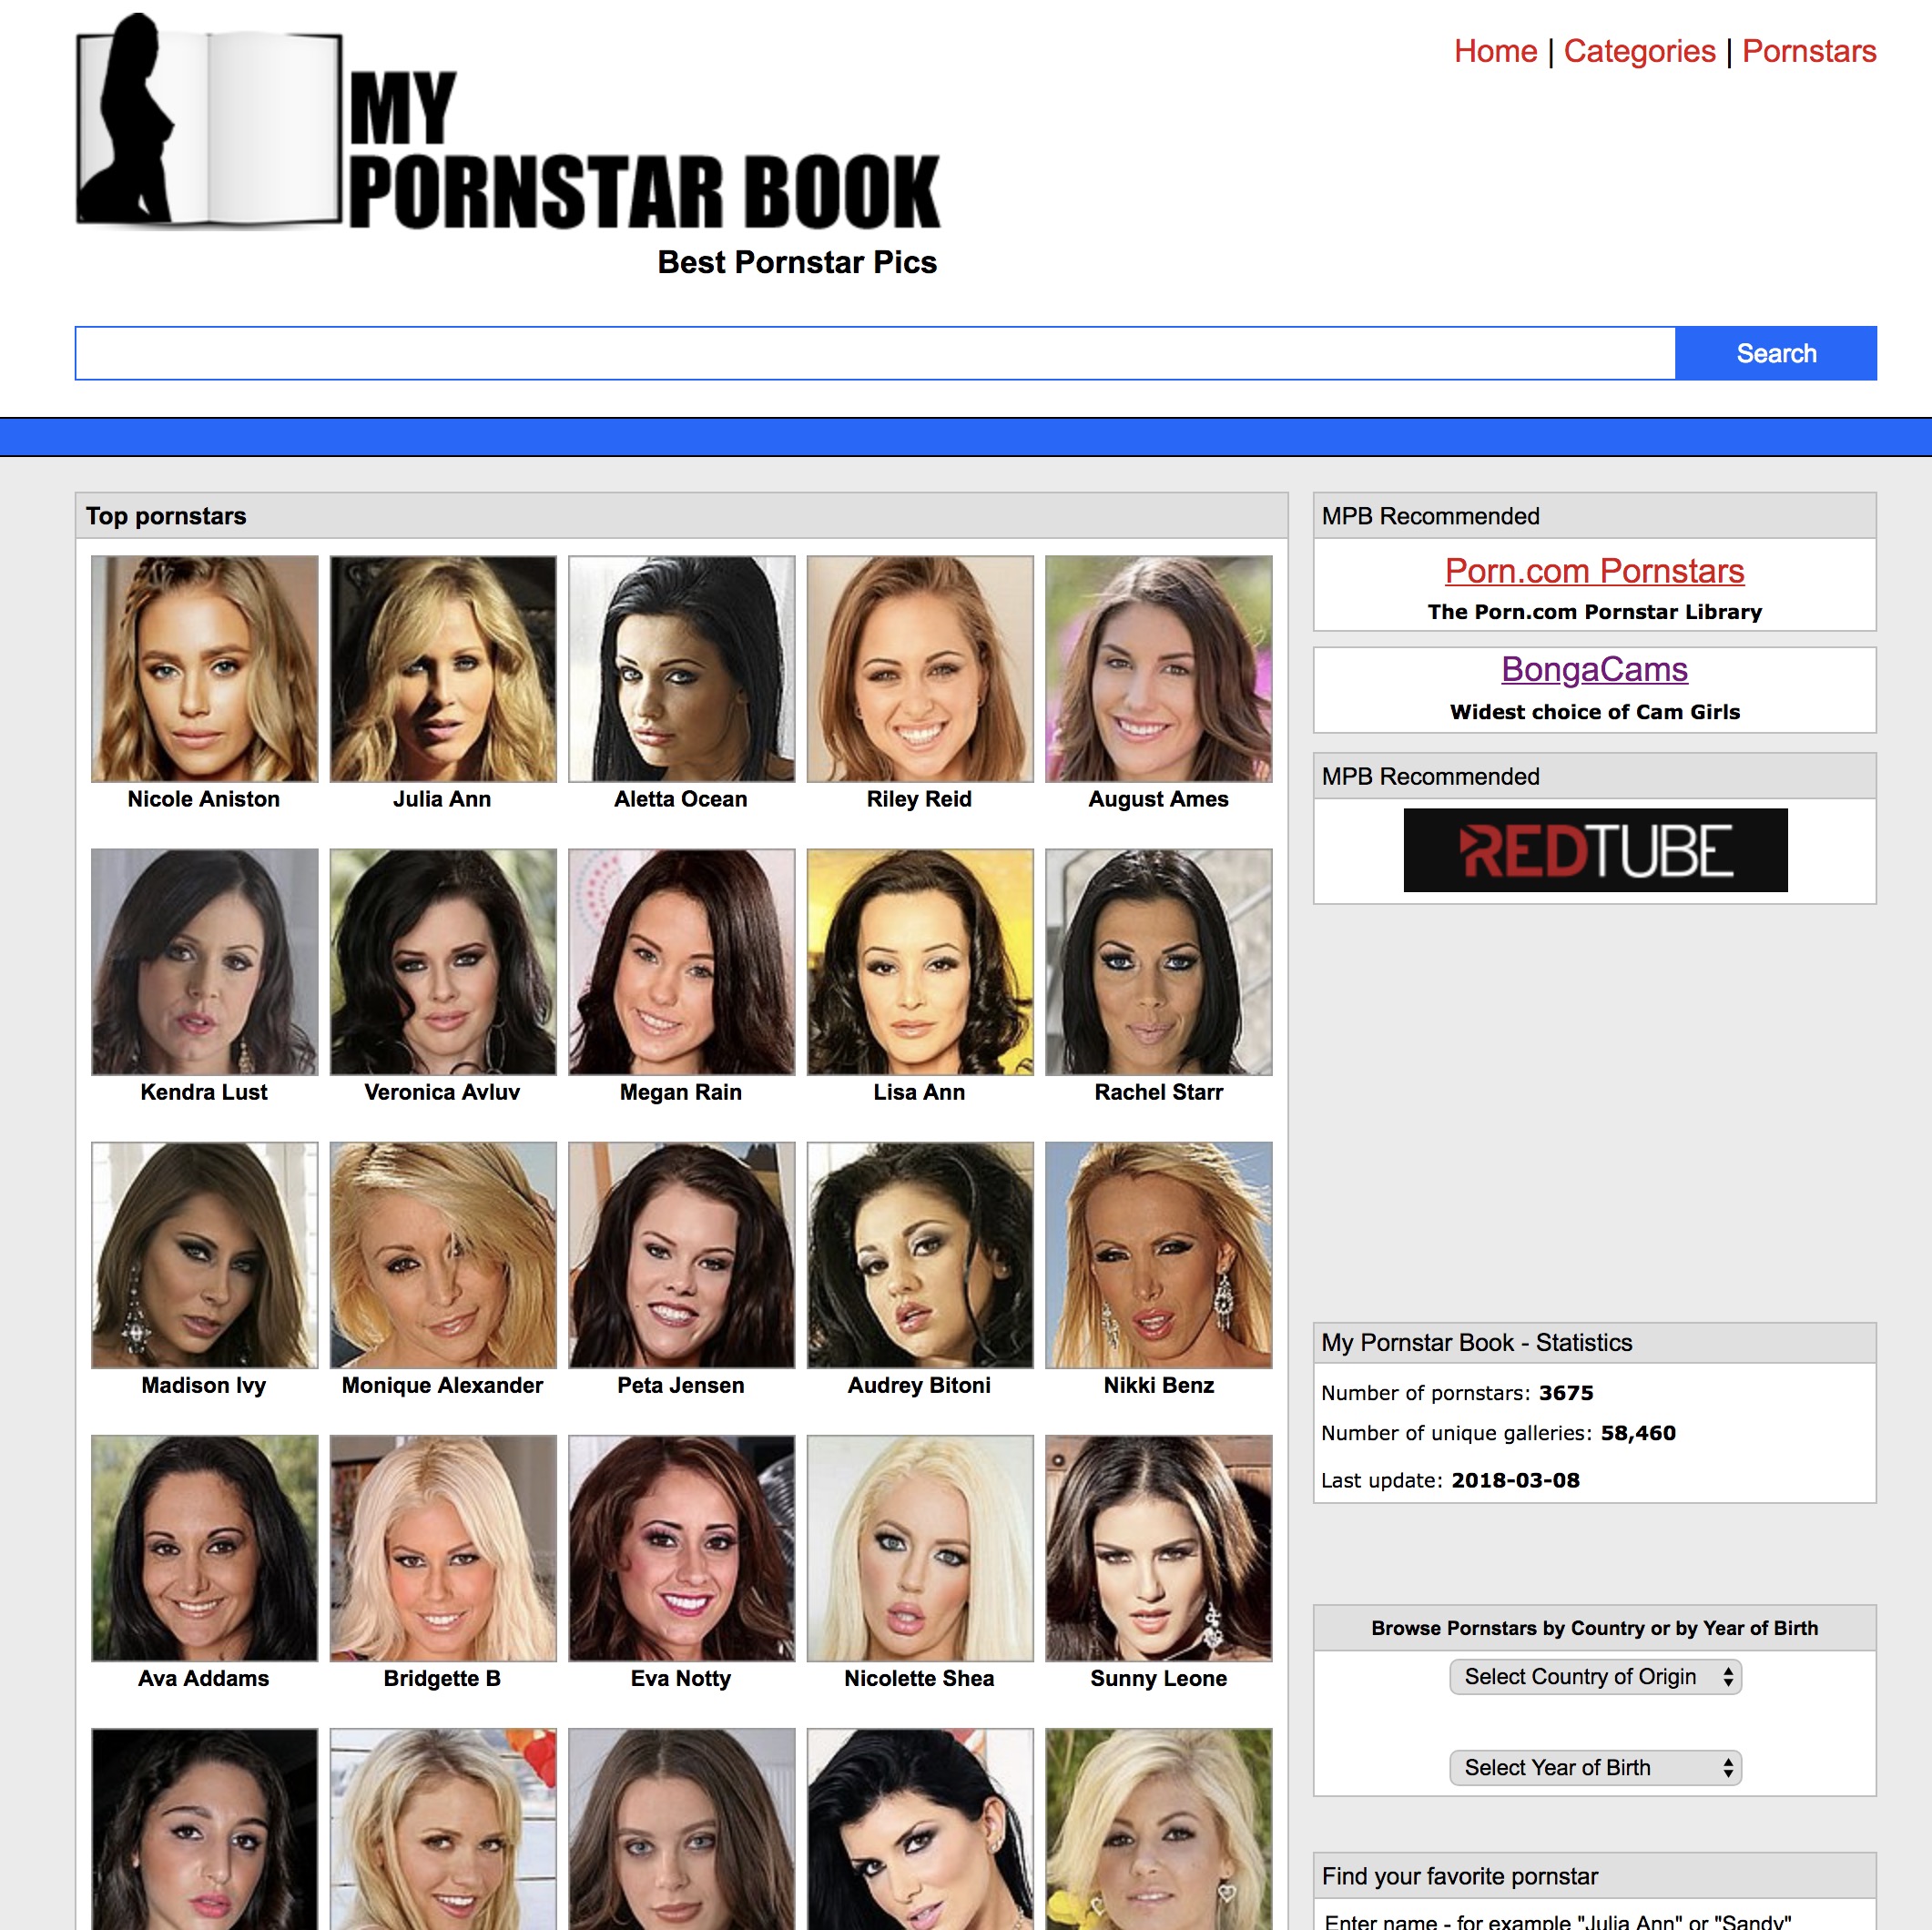 All porn star name and image